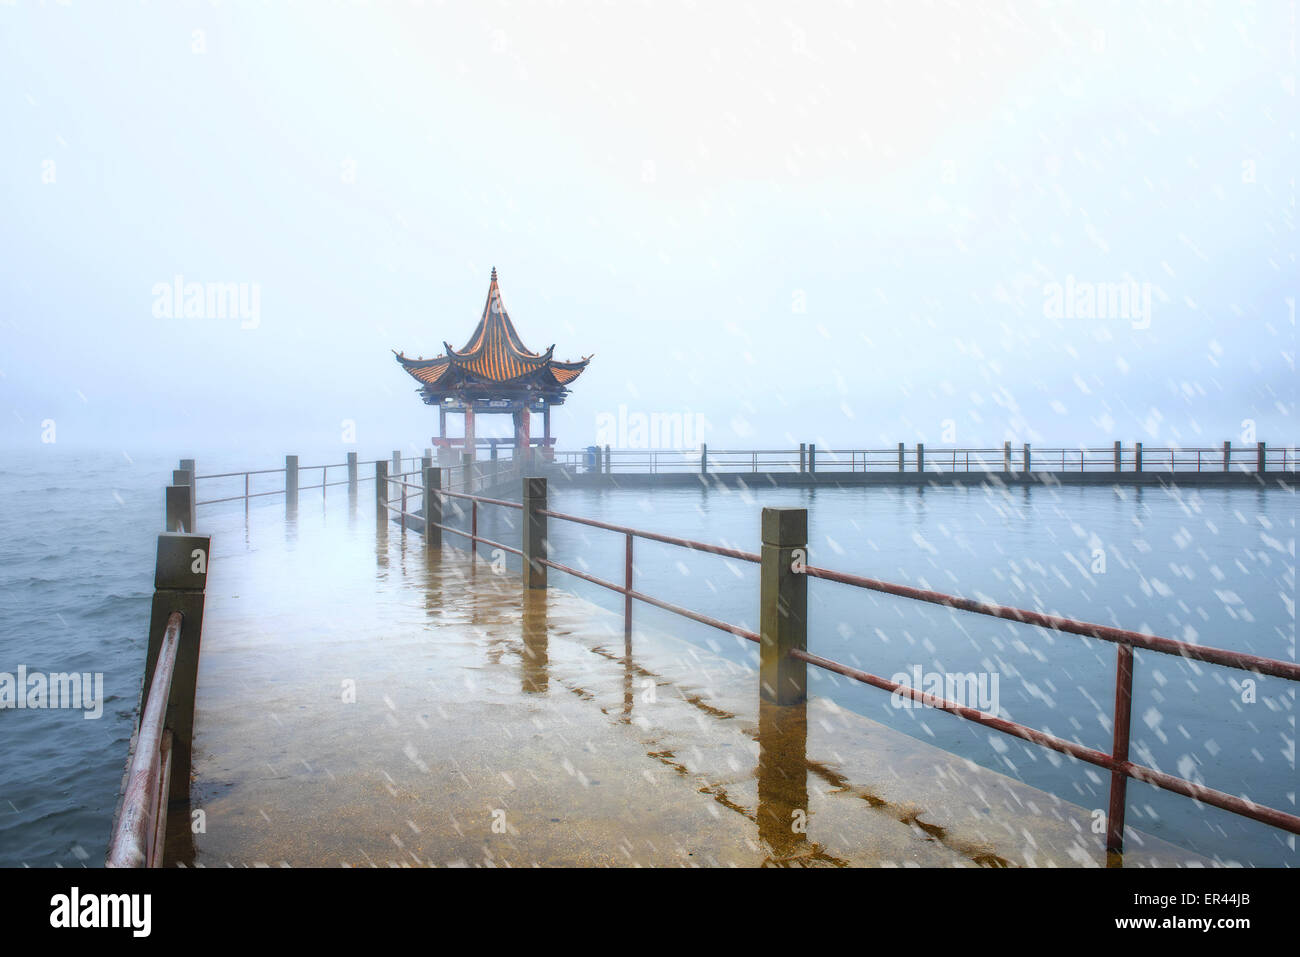 Dali, Yunnan, CHN. 10th Jan, 2015. Dali, CHINA - Jan 09 2015: (EDITORIAL USE ONLY. CHINA OUT) ï¼ˆPhoto has been processedï¼‰Erhai Lake in the rain. Erhai Lake is the largest highland lake next to Dianchi and one of the seven biggest fresh water lakes in China. ''Erhai'' means ''sea shaped like an ear'' in Chinese. Implying that the lake is ear shaped and as large as a sea, it was so named. The lake covers an area of 250 square kilometers and is located about 2 kilometers east of Dali. It is like a crescent lying between Cangshan and Dali city as seen from Cangshan Mount. In a sunny day, the c Stock Photo